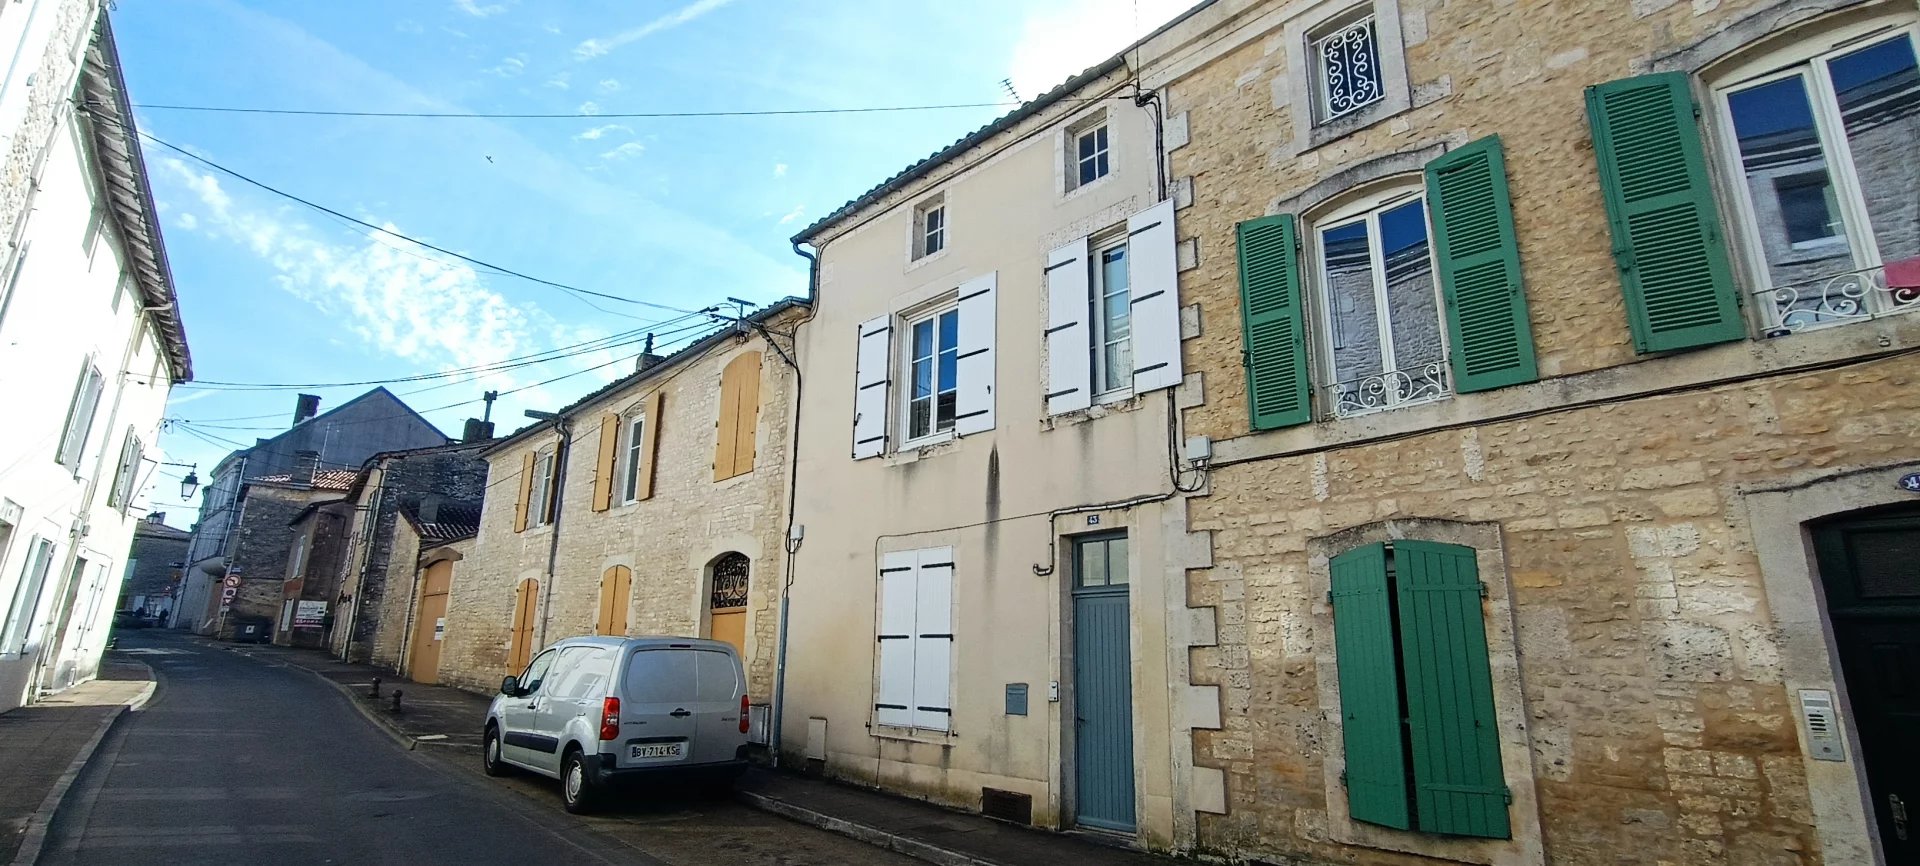 2 bedroom town house close to shops